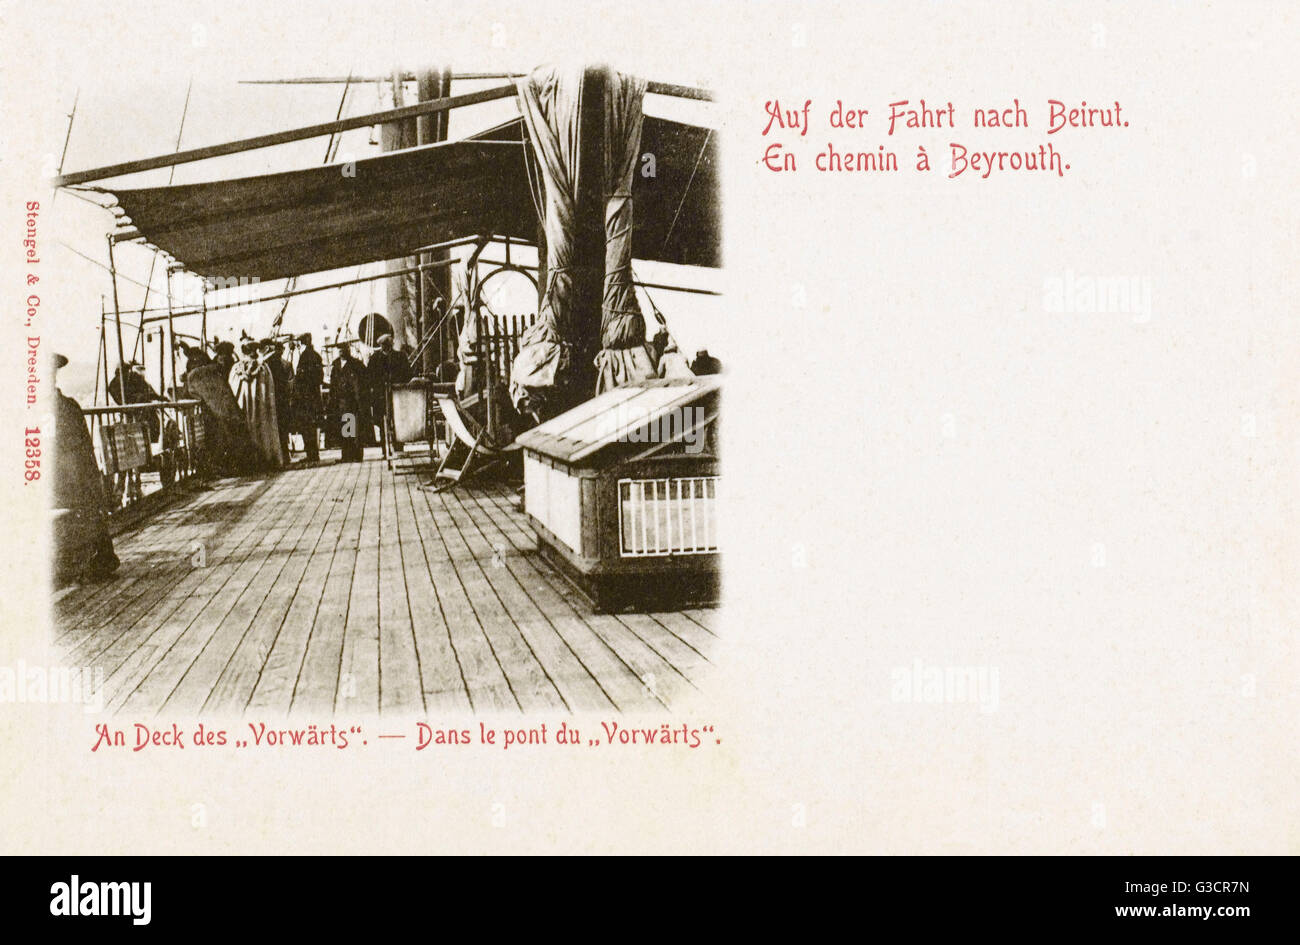 On the main deck of the 'Vorwarts' - Ship in port at Beirut Stock Photo